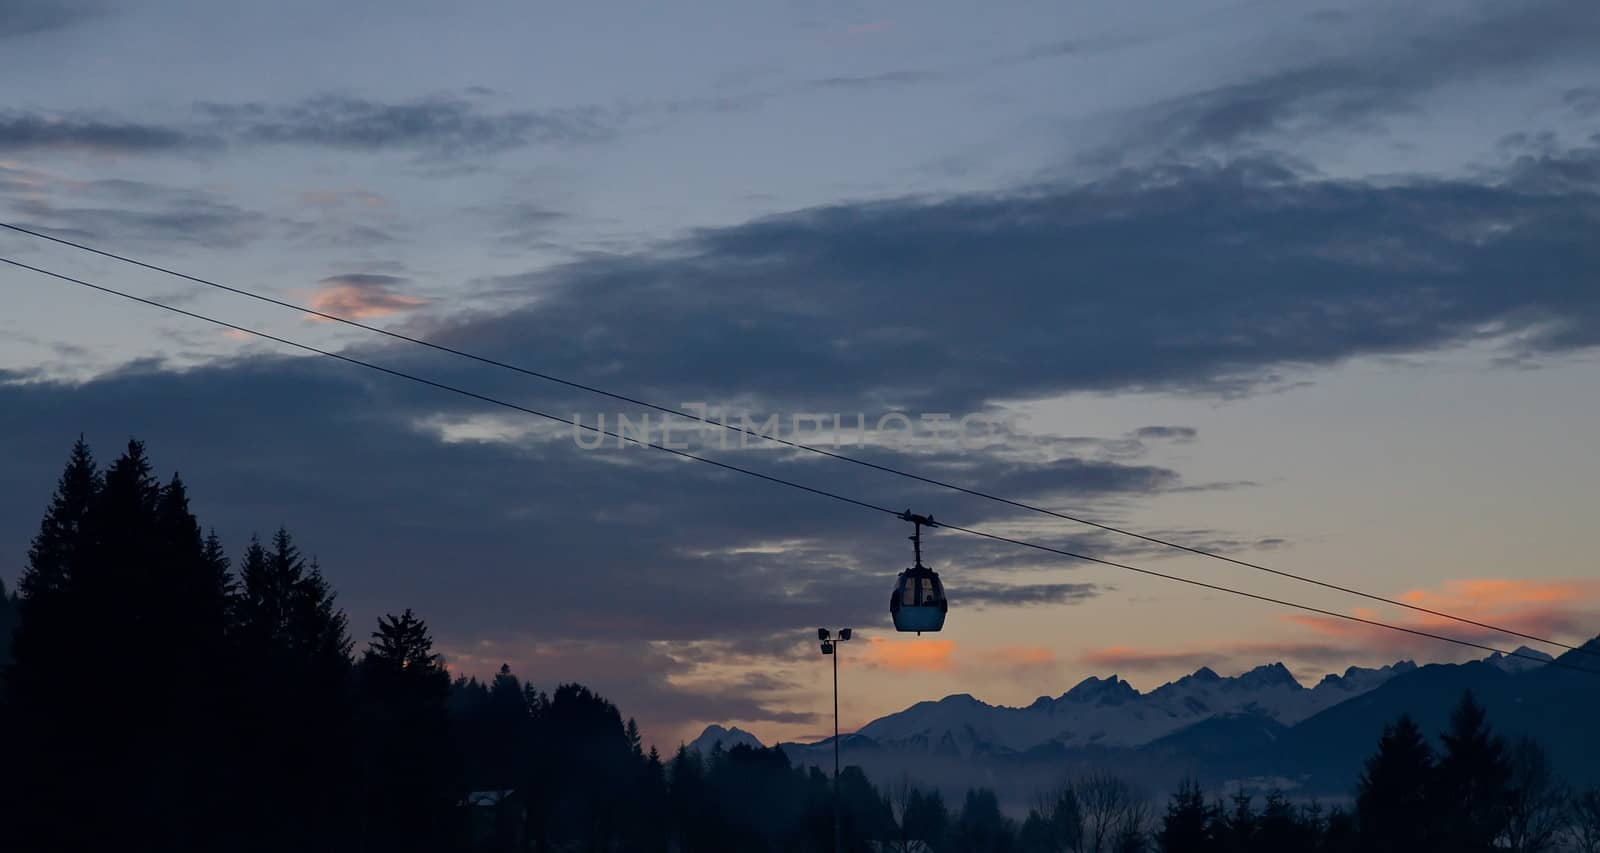 Ski lift by anderm